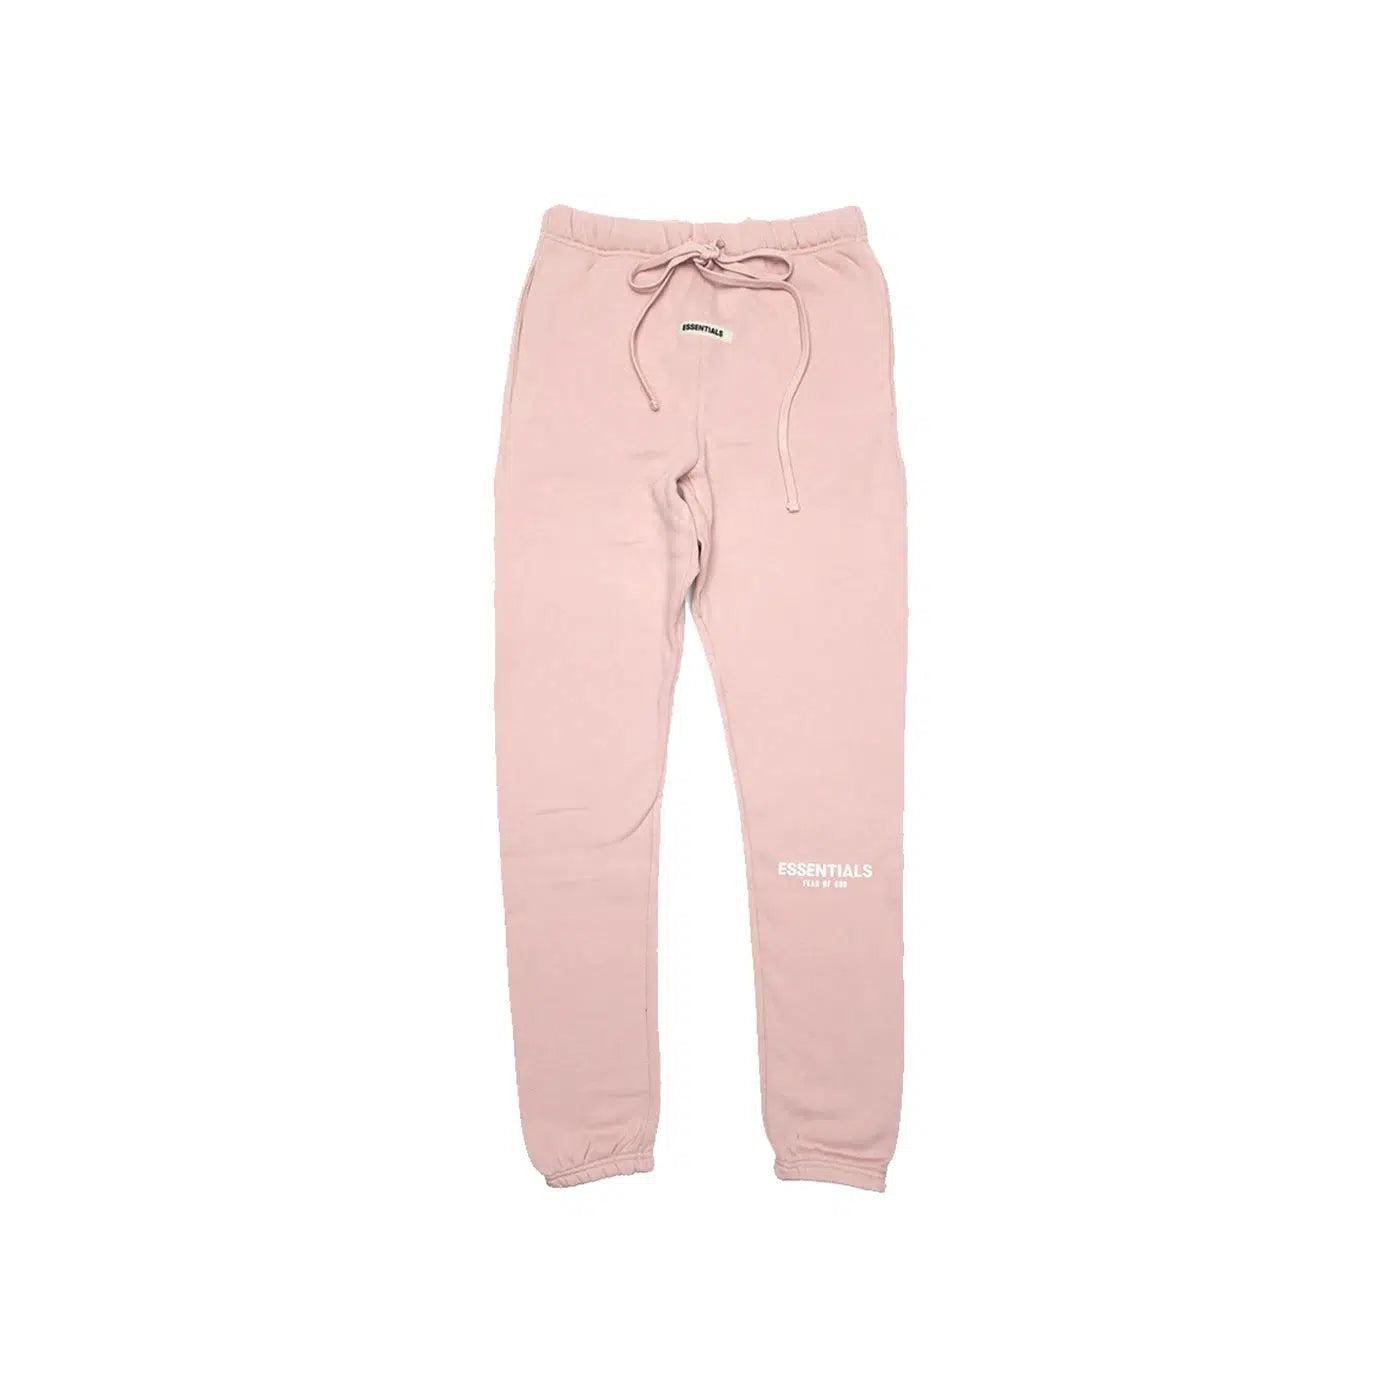 FEAR OF GOD ESSENTIALS SWEATPANTS SS19 BLUSH | Waves Never Die | Fear of God | Pants